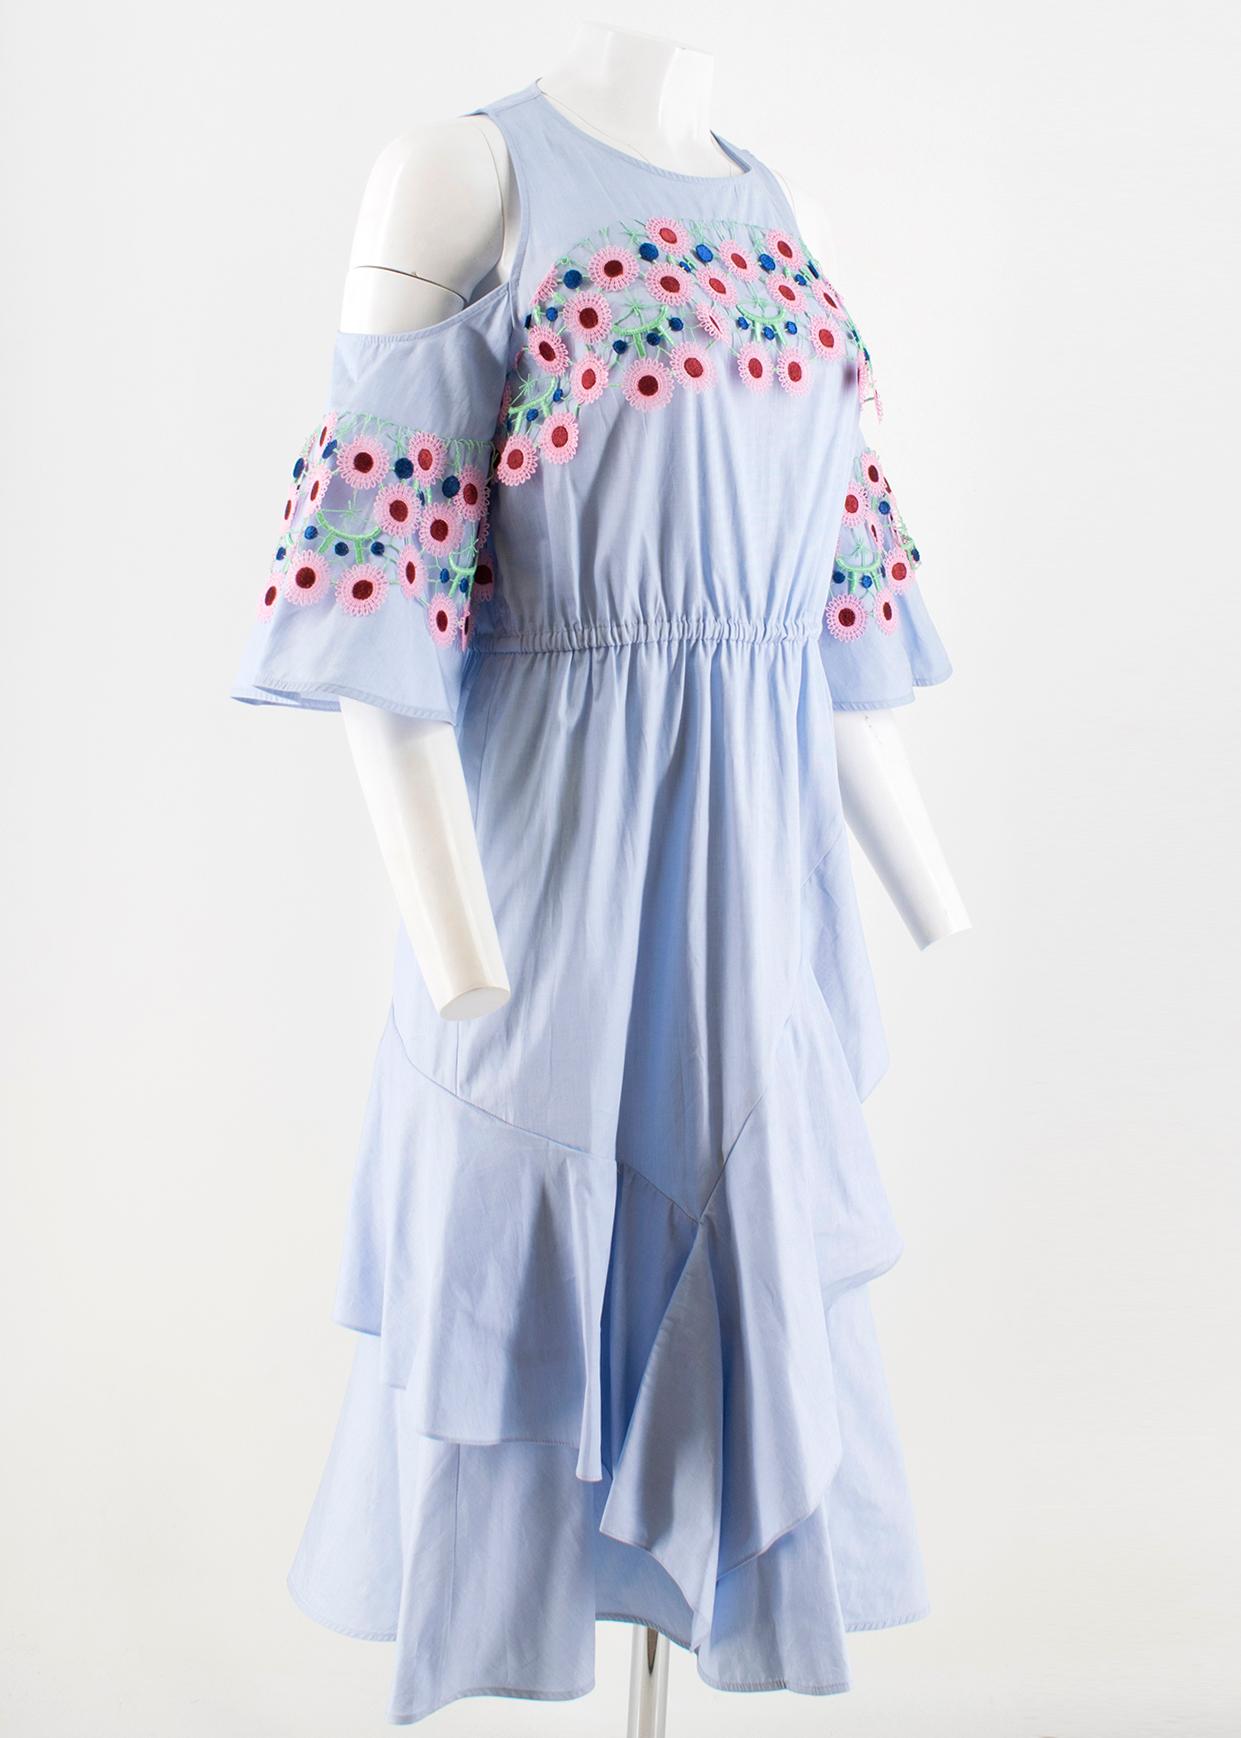 Peter Pilotto Sky Blue Midi Dress

- Sky blue, lightweight, midi dress
- Cold shoulders, short sleeves 
- Round neck
- Floral guipure lace trim around the chest and sleeves
- Elasticated waist
- Ruffled trimmed flared skirt
- Centre-back zip